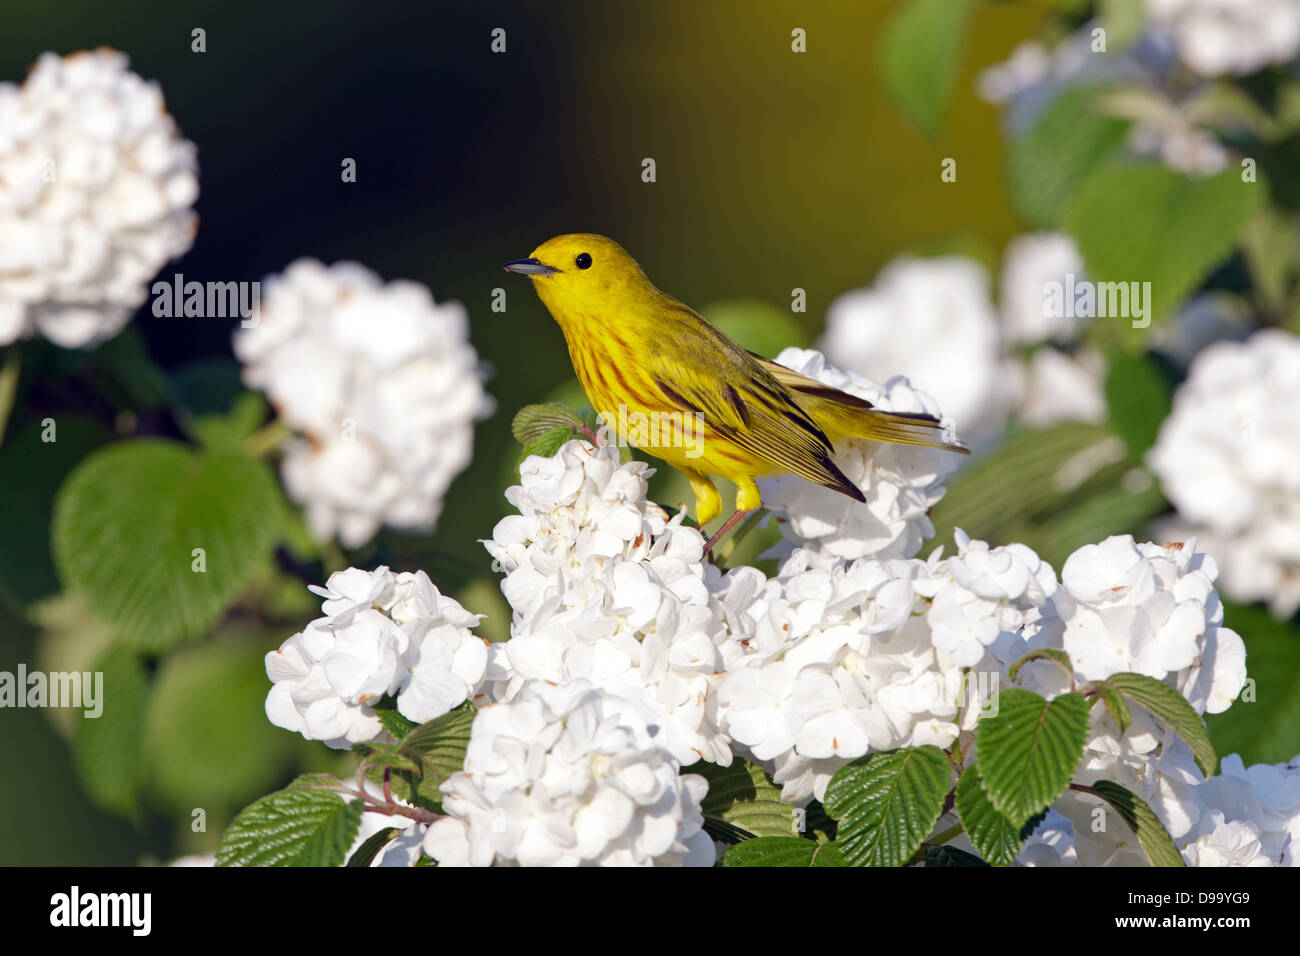 Yellow Warbler perching in Oakleaf Hydrangea Blossoms bird songbird Ornithology Science Nature Wildlife Environment Stock Photo